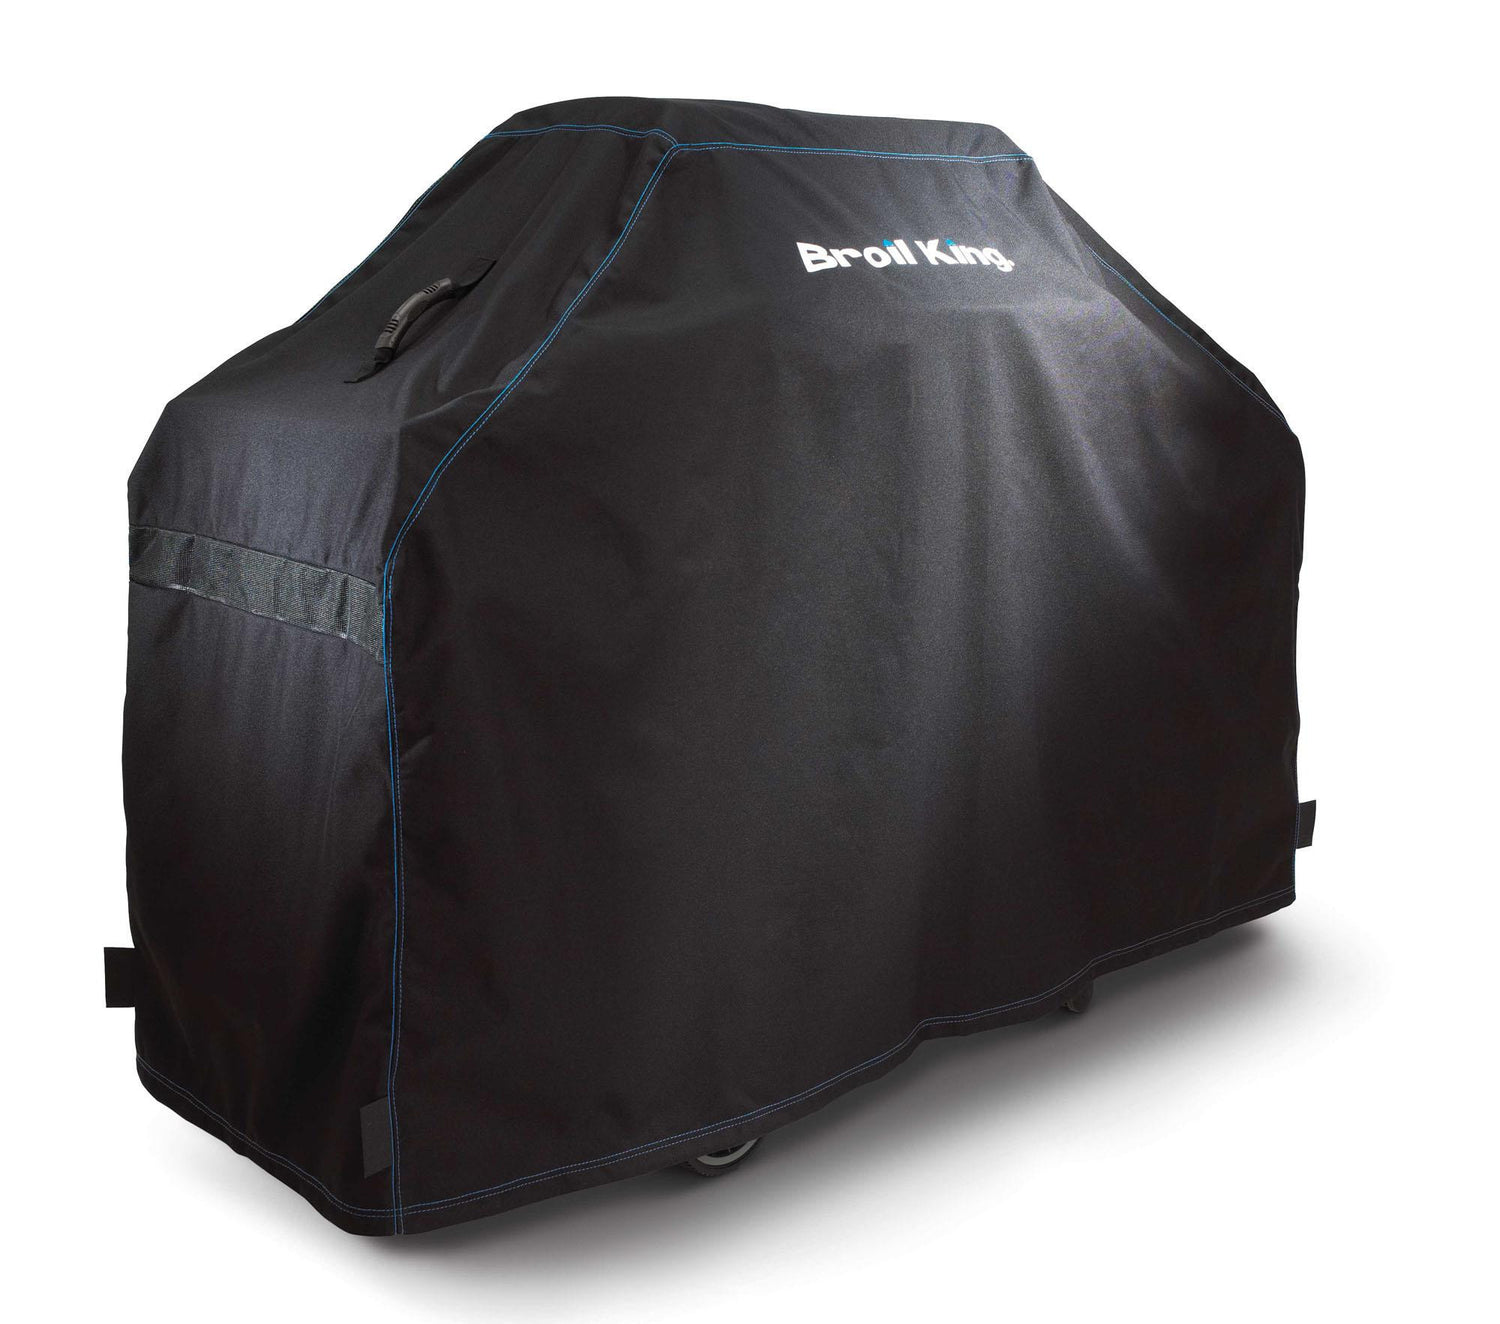 Broil King 51 Inch Heavy Duty Cover | 68470. Stop by any of Barbecues 5 locations for all of your BBQ, patio, accessory and cover needs. 3 Locations in the GTA: Burlington, Oakville & Etobicoke, Ontario. 2 Locations in Calgary, Alberta.